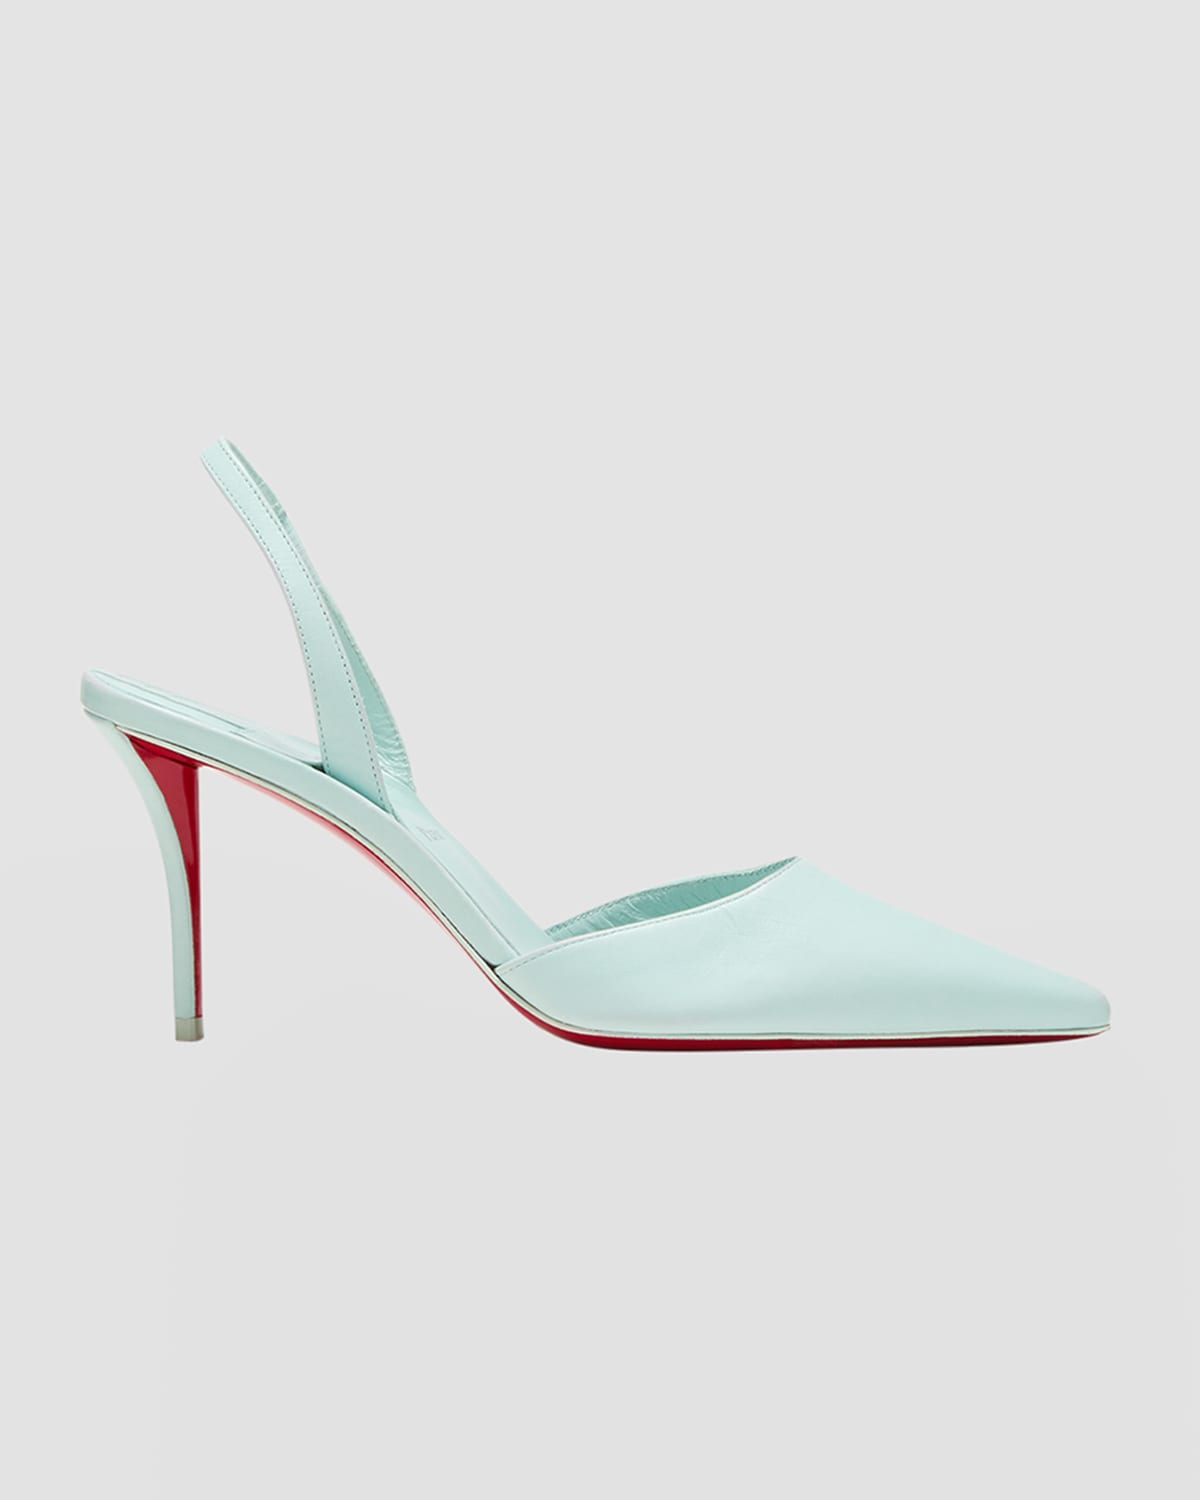 Shop Christian Louboutin Apostropha Leather Slingback Red Sole Pumps In Iceberg